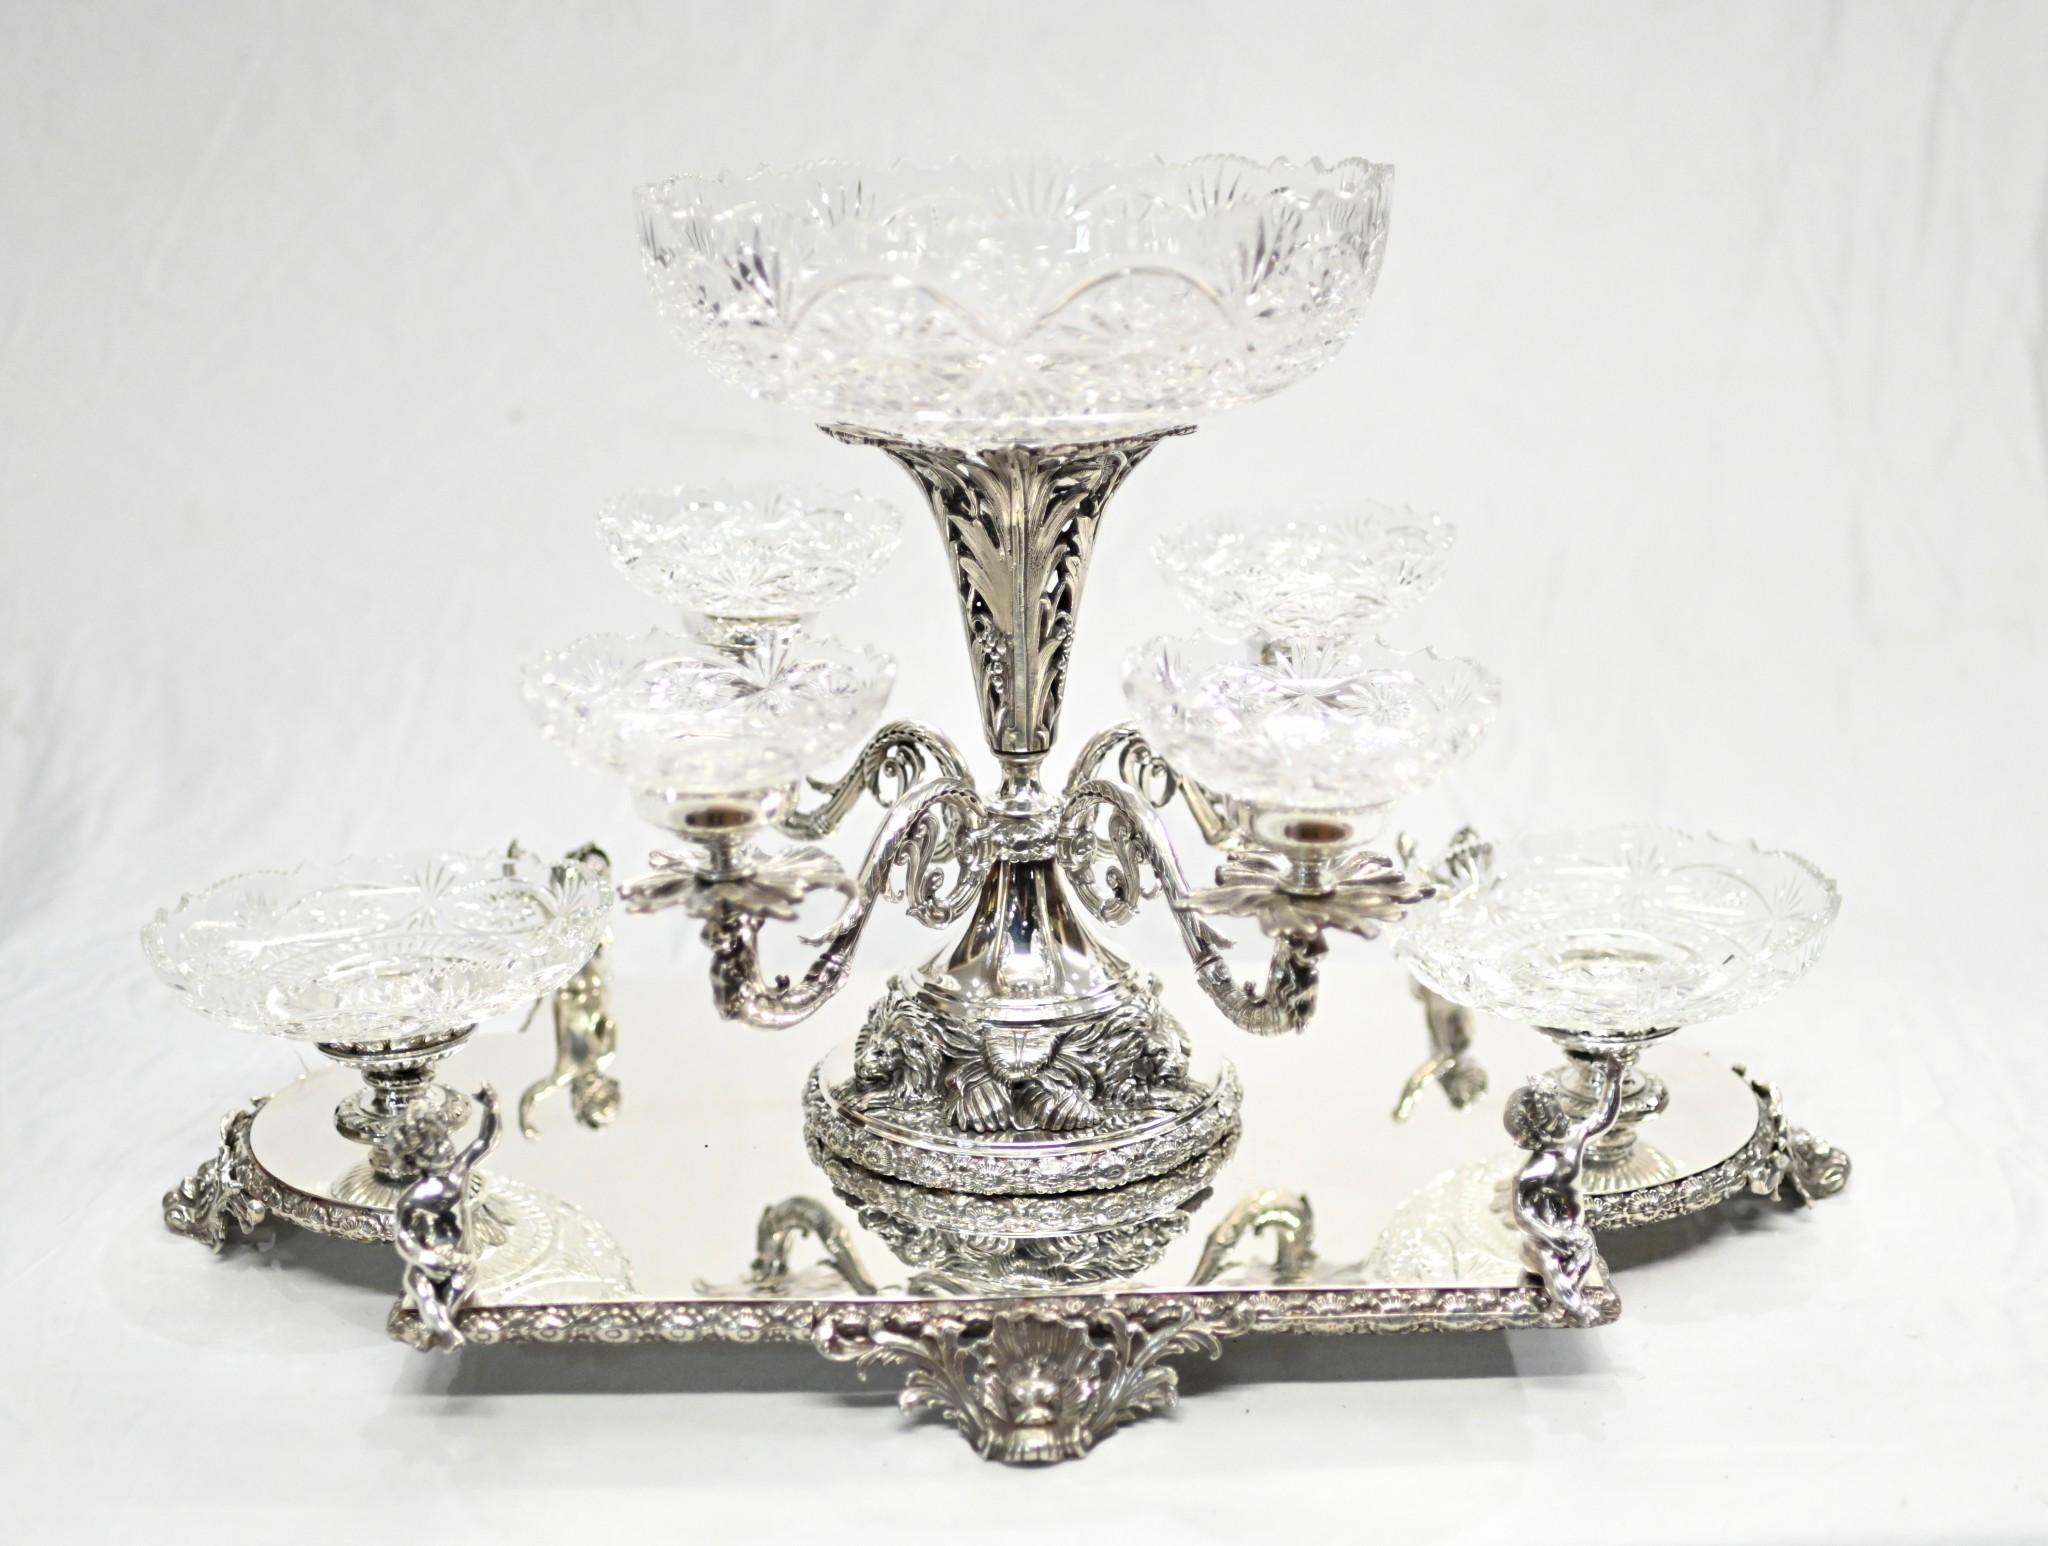 Elegant Sheffield silver plated epergne with glass dishes
Features the main centre bowl and six smaller side dishes
Great for an elegant dinner setting - a high end dinner party - to serve sweets and side dishes
Stands on the mirrored tray stand